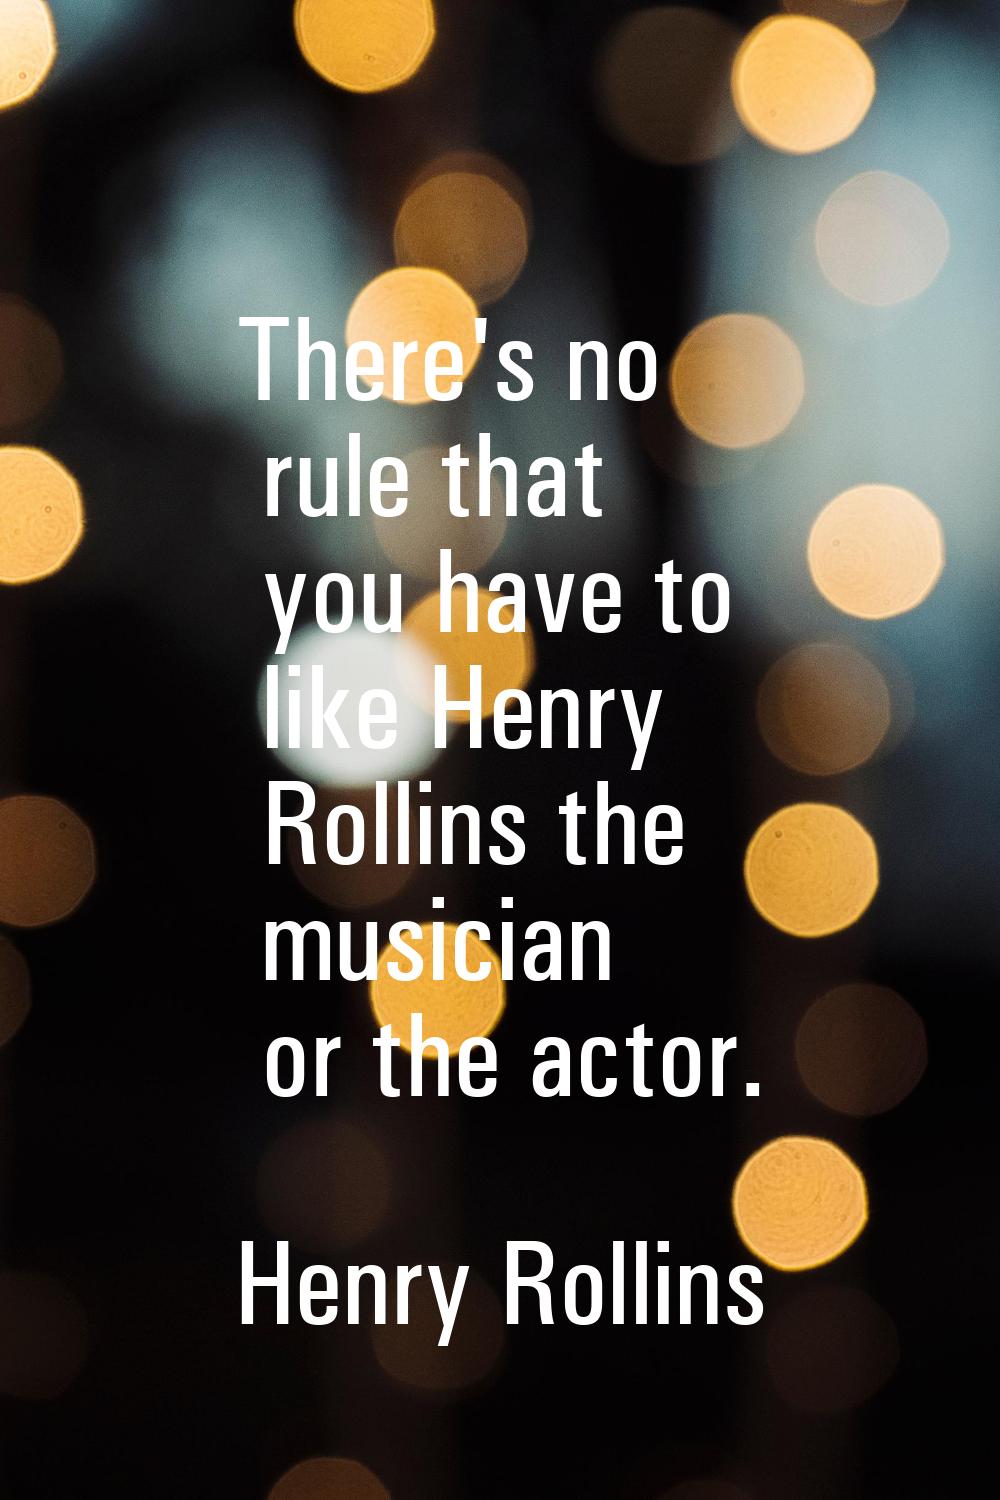 There's no rule that you have to like Henry Rollins the musician or the actor.